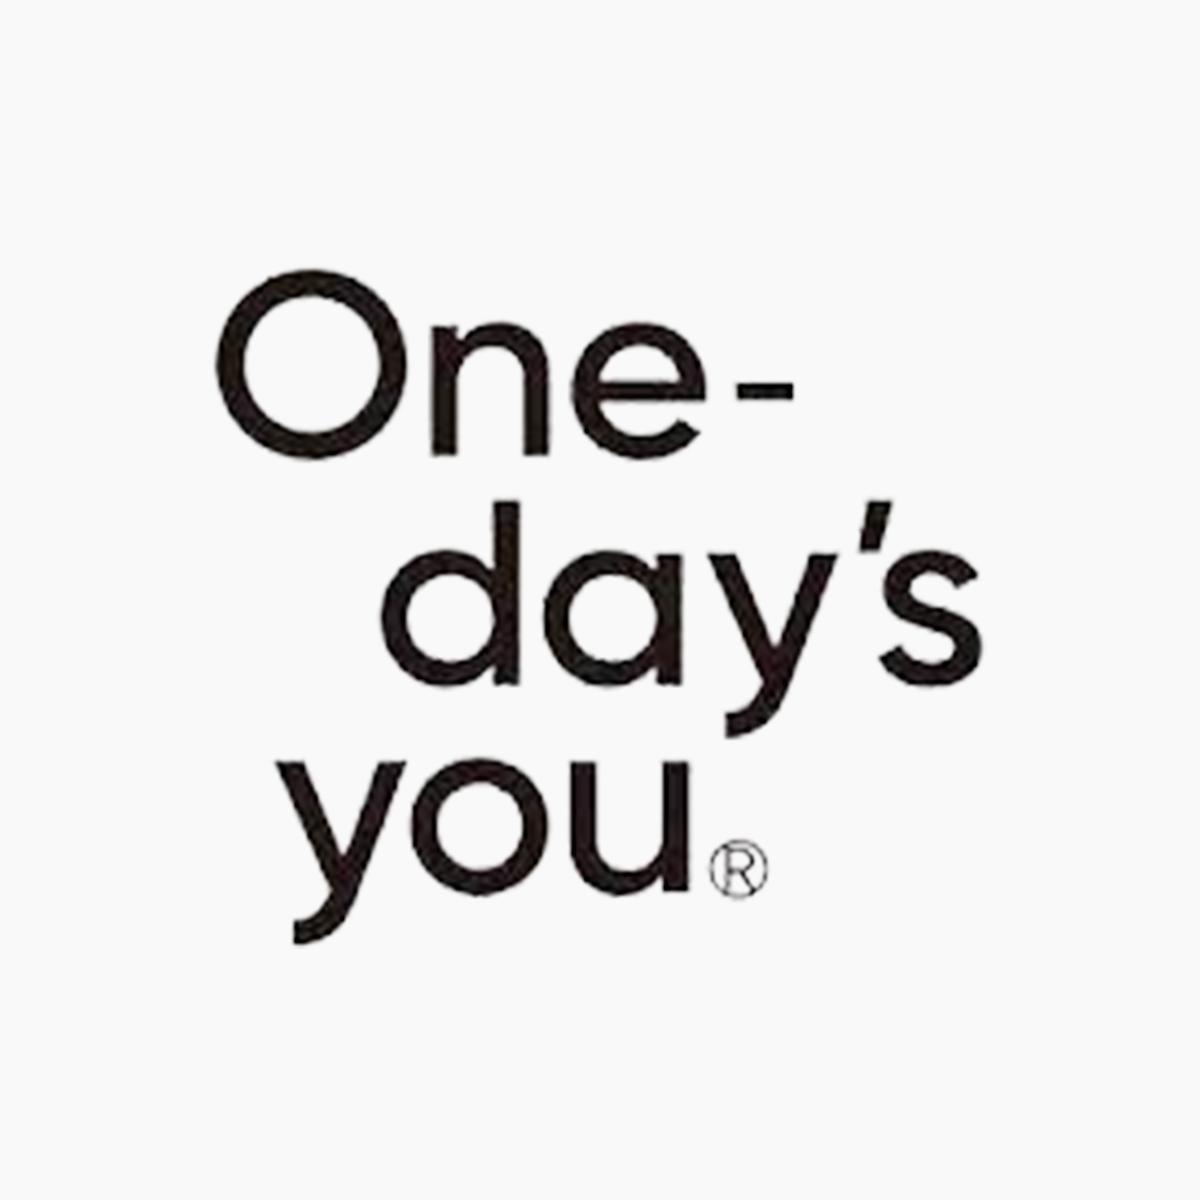 One-day's You